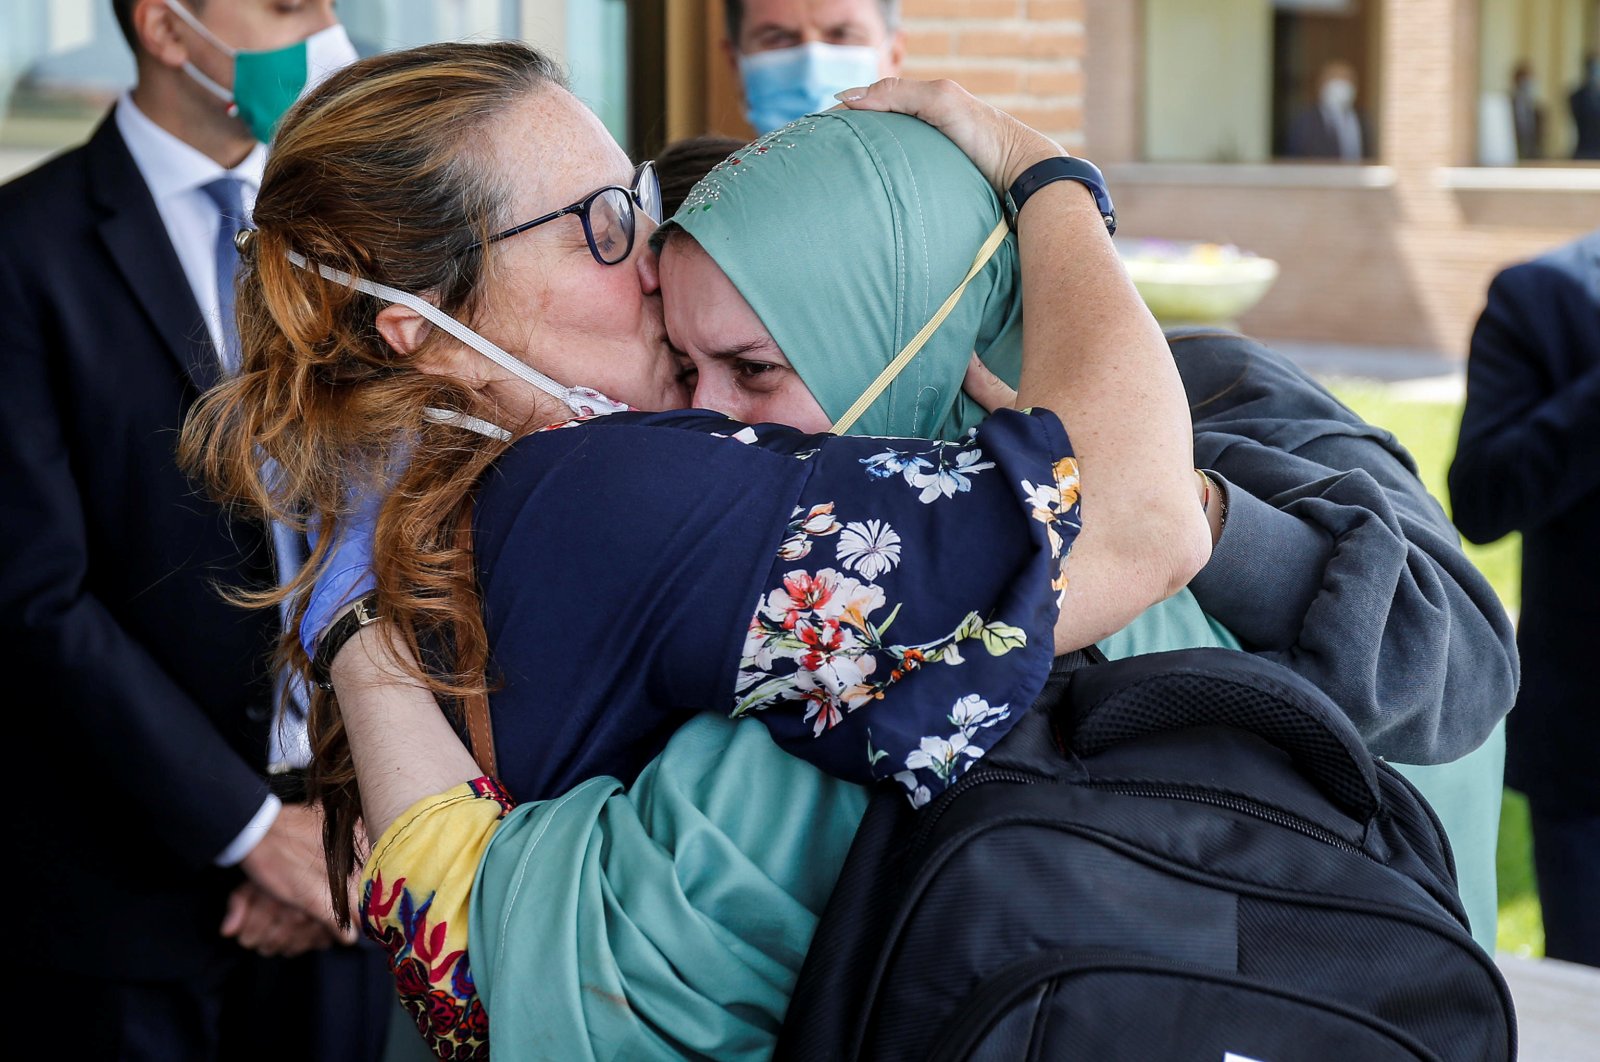 Silvia Romano, an Italian aid worker who was kidnapped by gunmen in Kenya 18 months ago, is kissed by her mother, Francesca Fumagalli, at Ciampino military airport in Rome, Italy, May 10, 2020. (Reuters Photo)